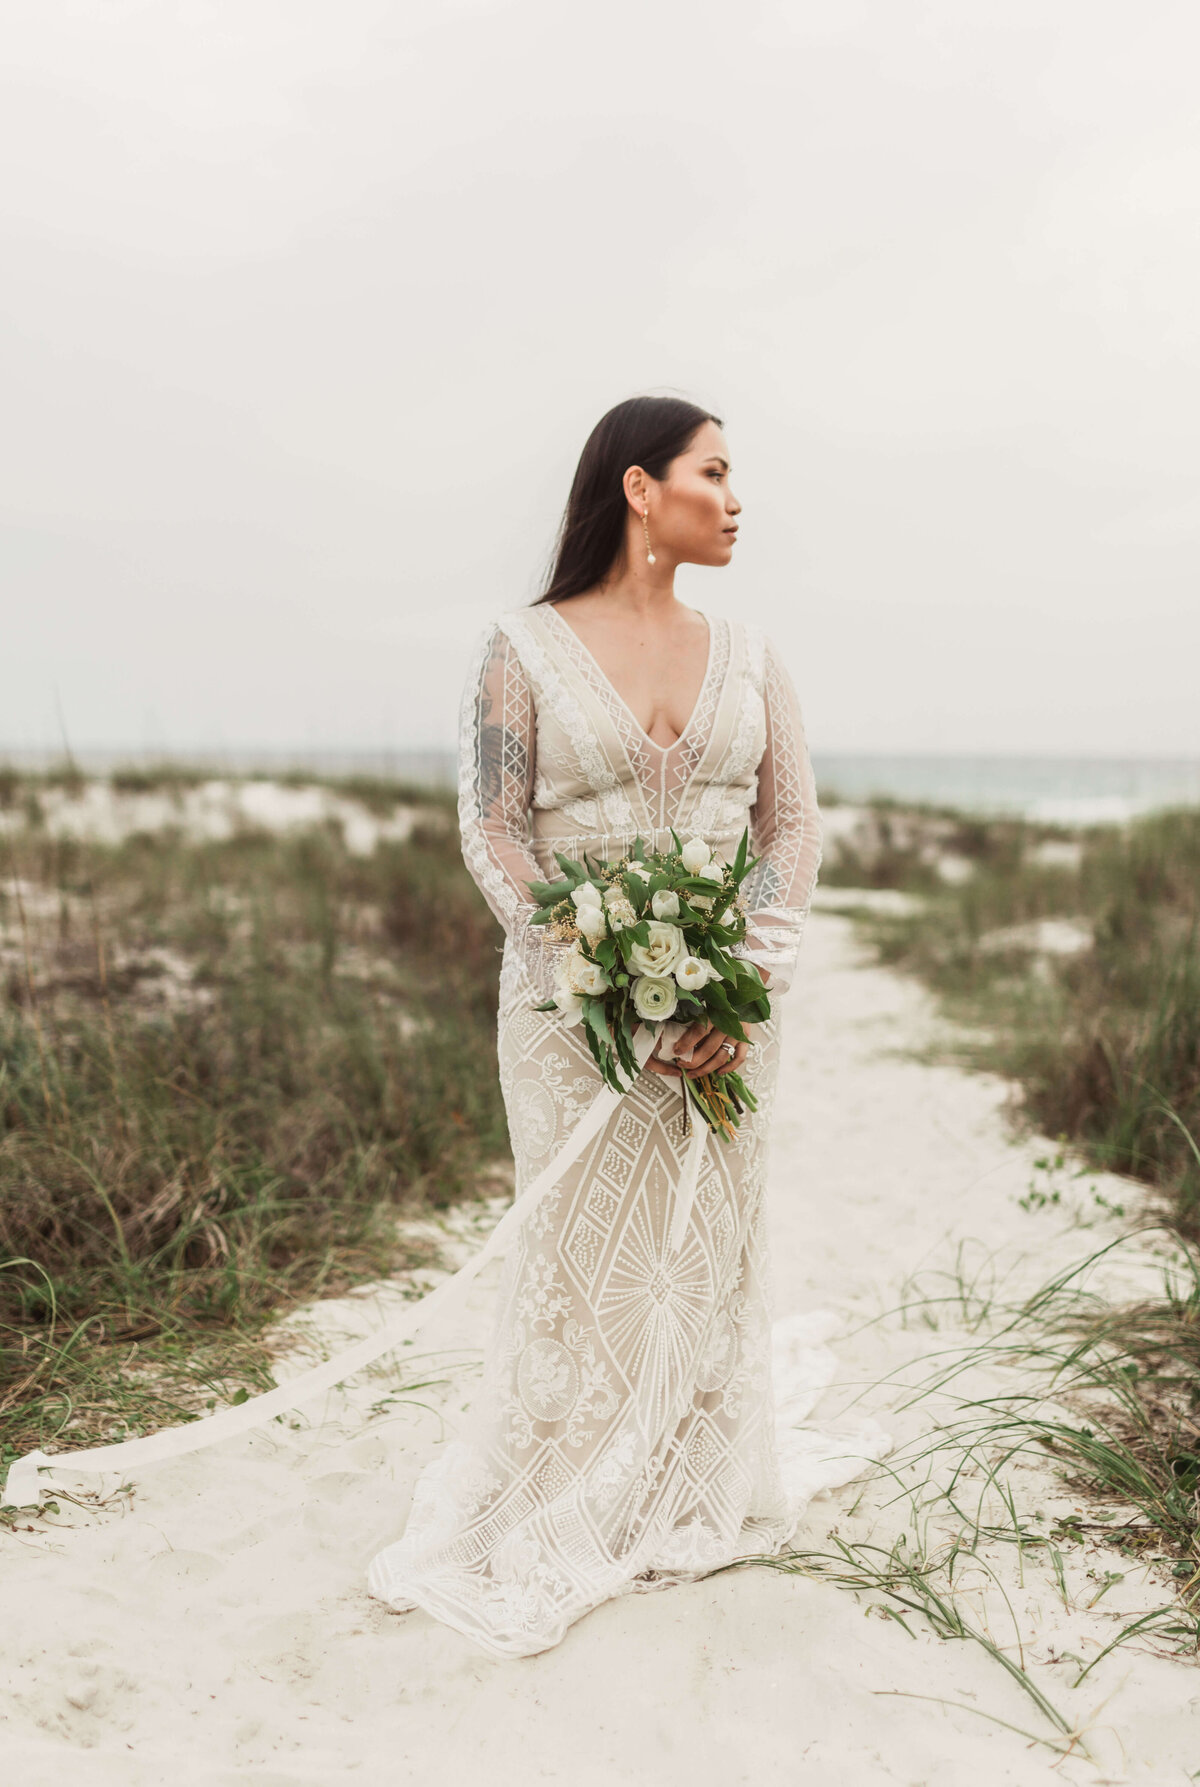 asian bride in bridal dress and veil walks on beach path - taken by panama city fl photographer Brittney Stanley